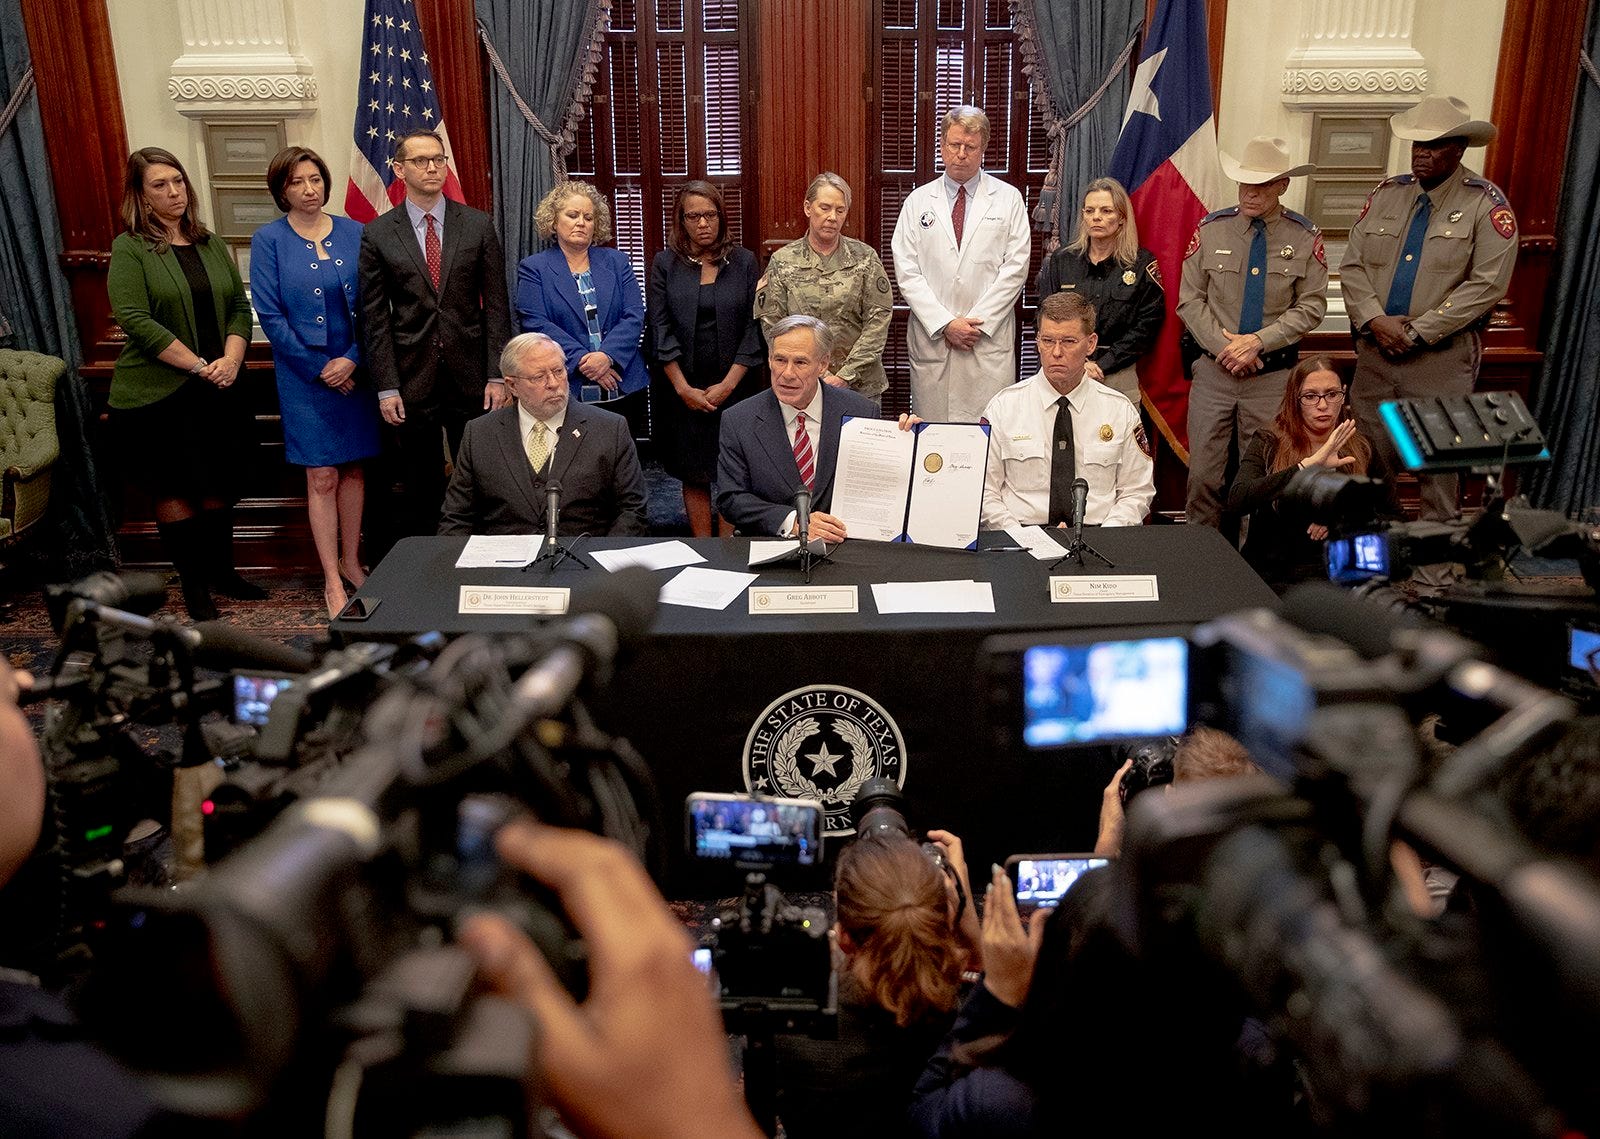 Texas Gov. Greg Abbott issues a disaster declaration in response to the growing threat of the novel coronavirus on Friday, March 13, 2020, in Austin, Texas.